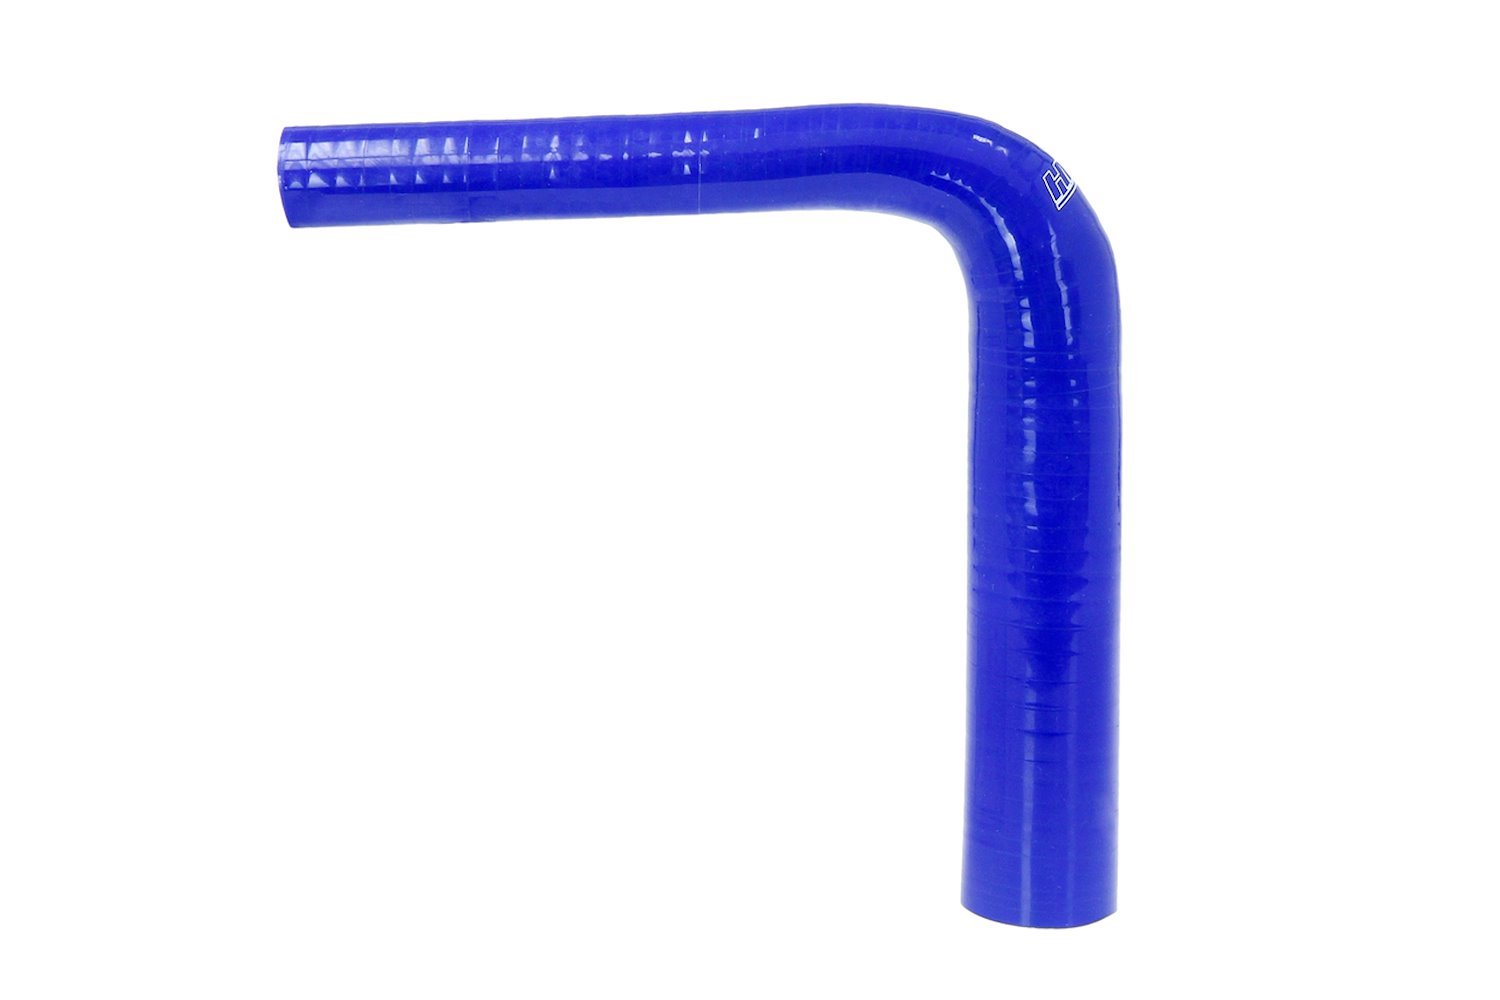 HTSER90-118-138-BLUE Silicone 90-Degree Elbow Hose, High-Temp Reinforced, 1-3/16 in. - 1-3/8 in. ID, Blue